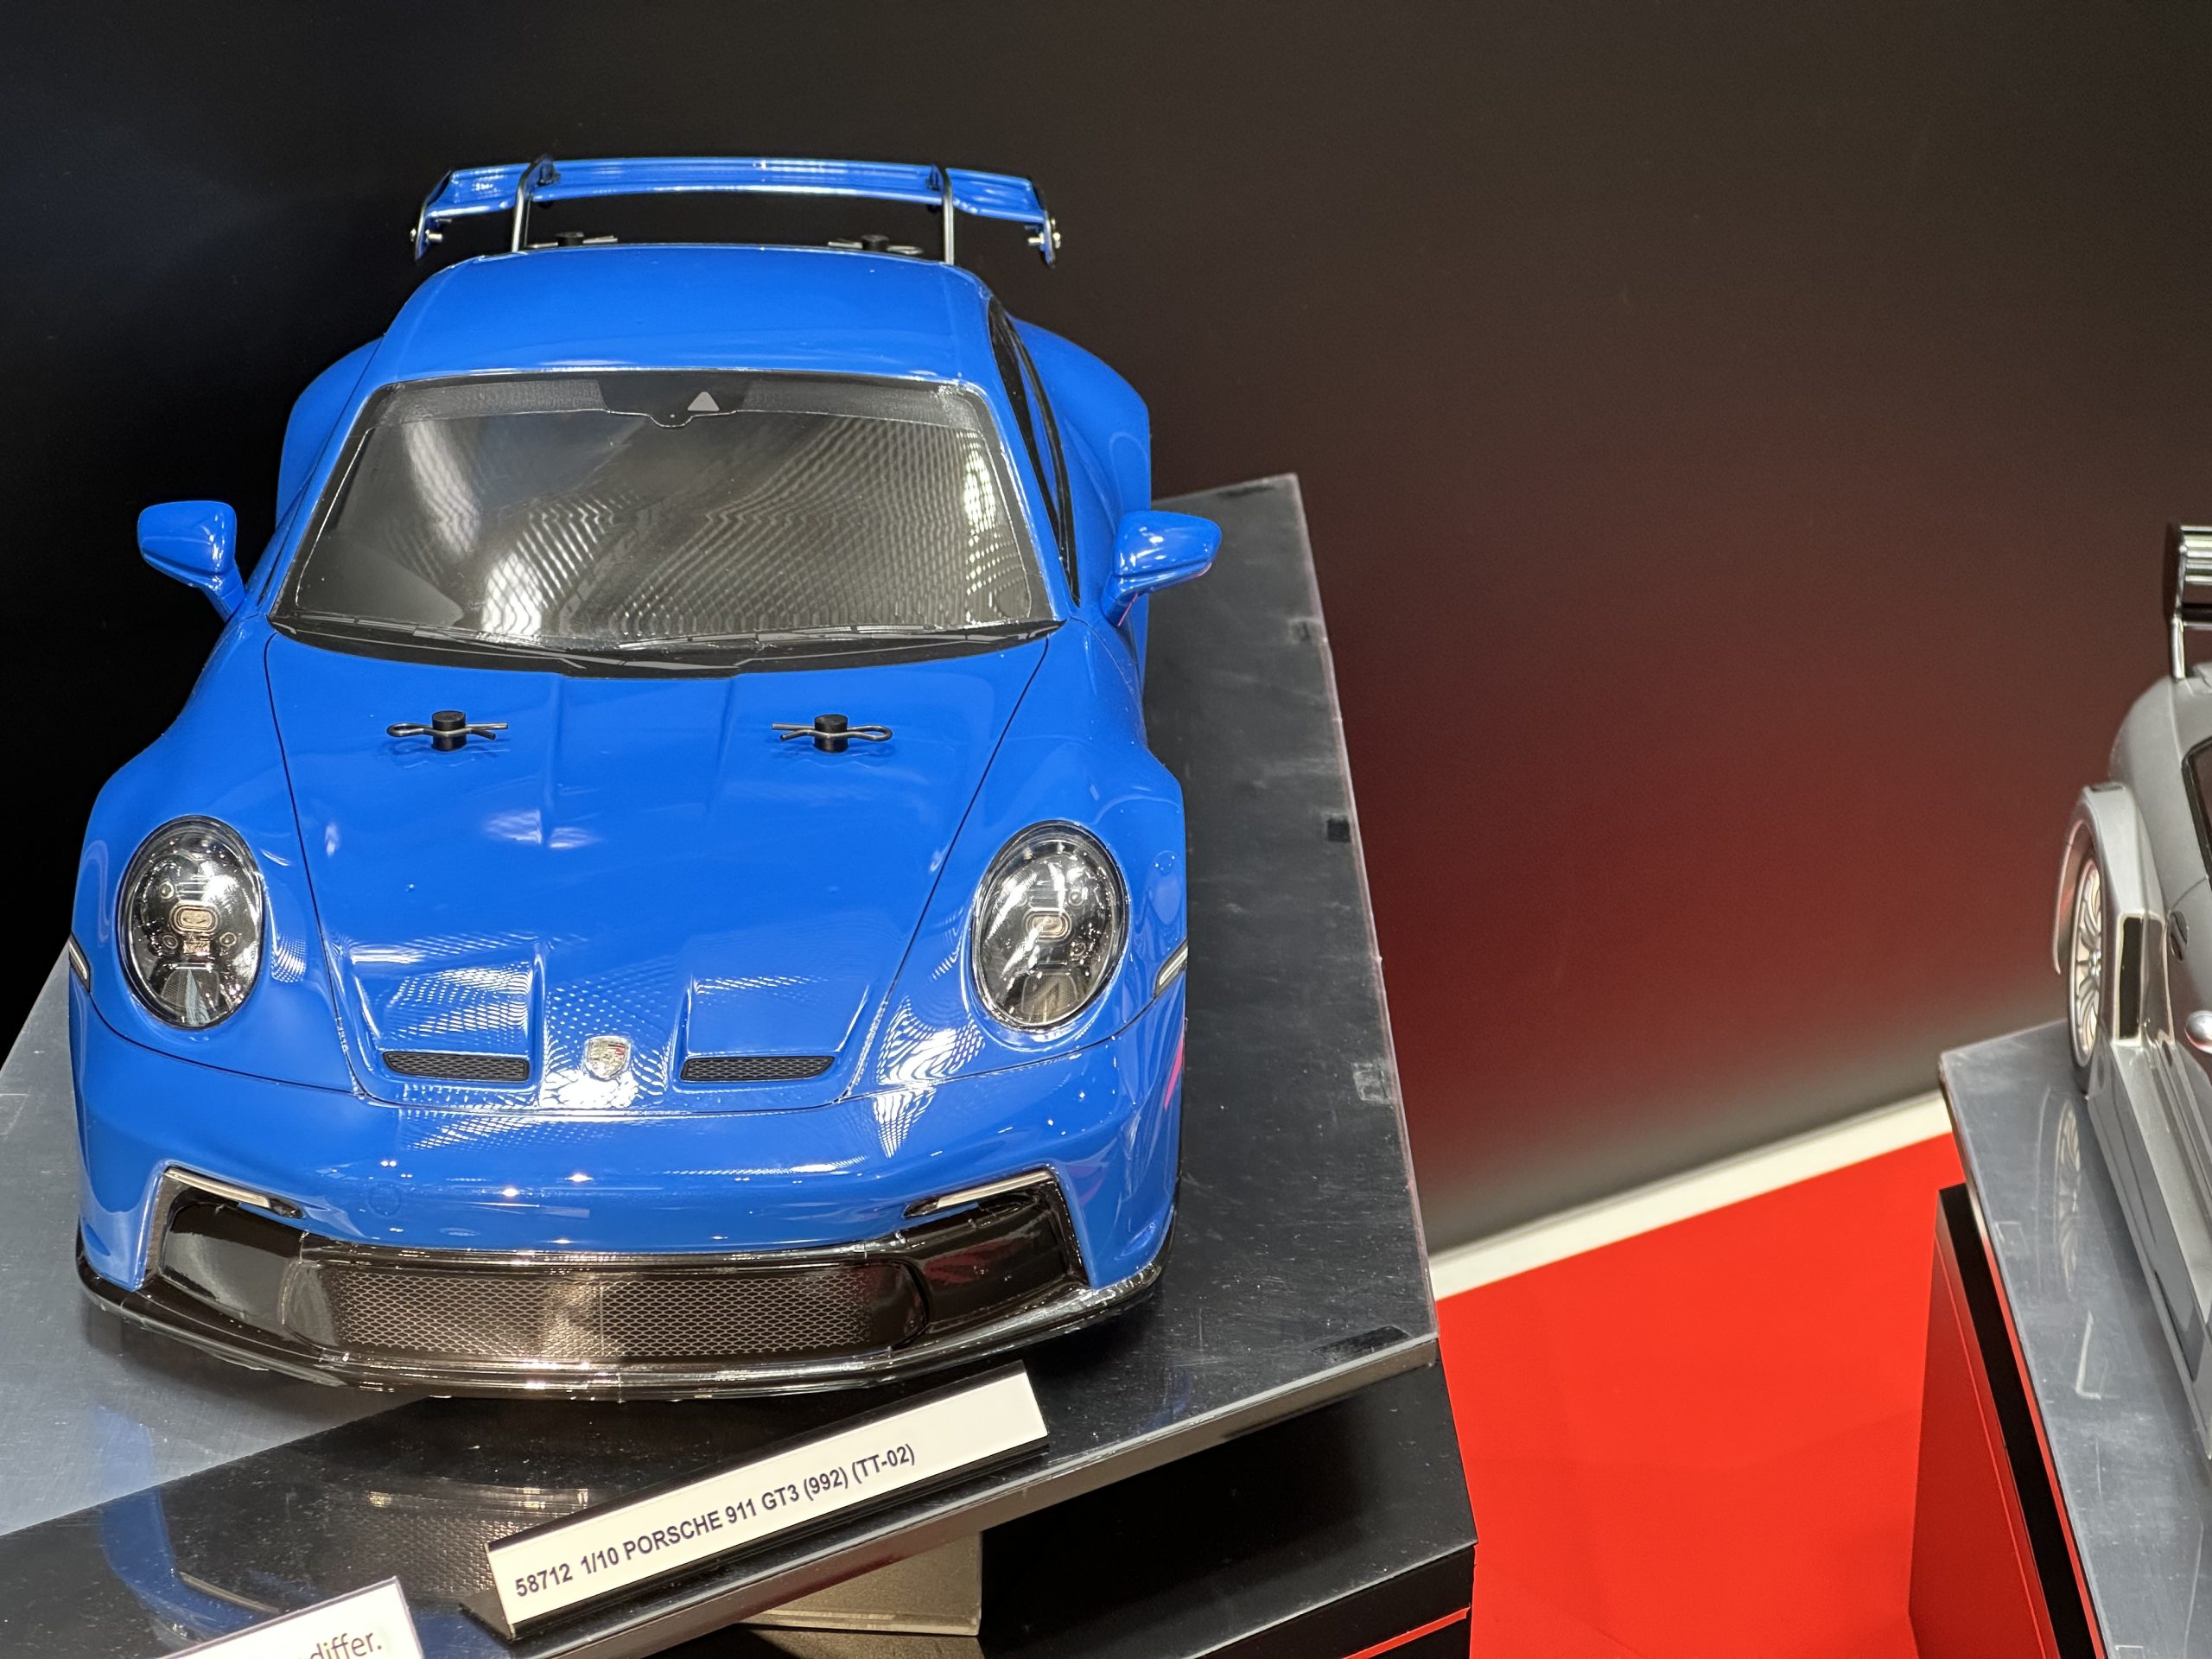 New Tamiya Releases At The 2023 Nuremberg Toy Fair - RC Car Action